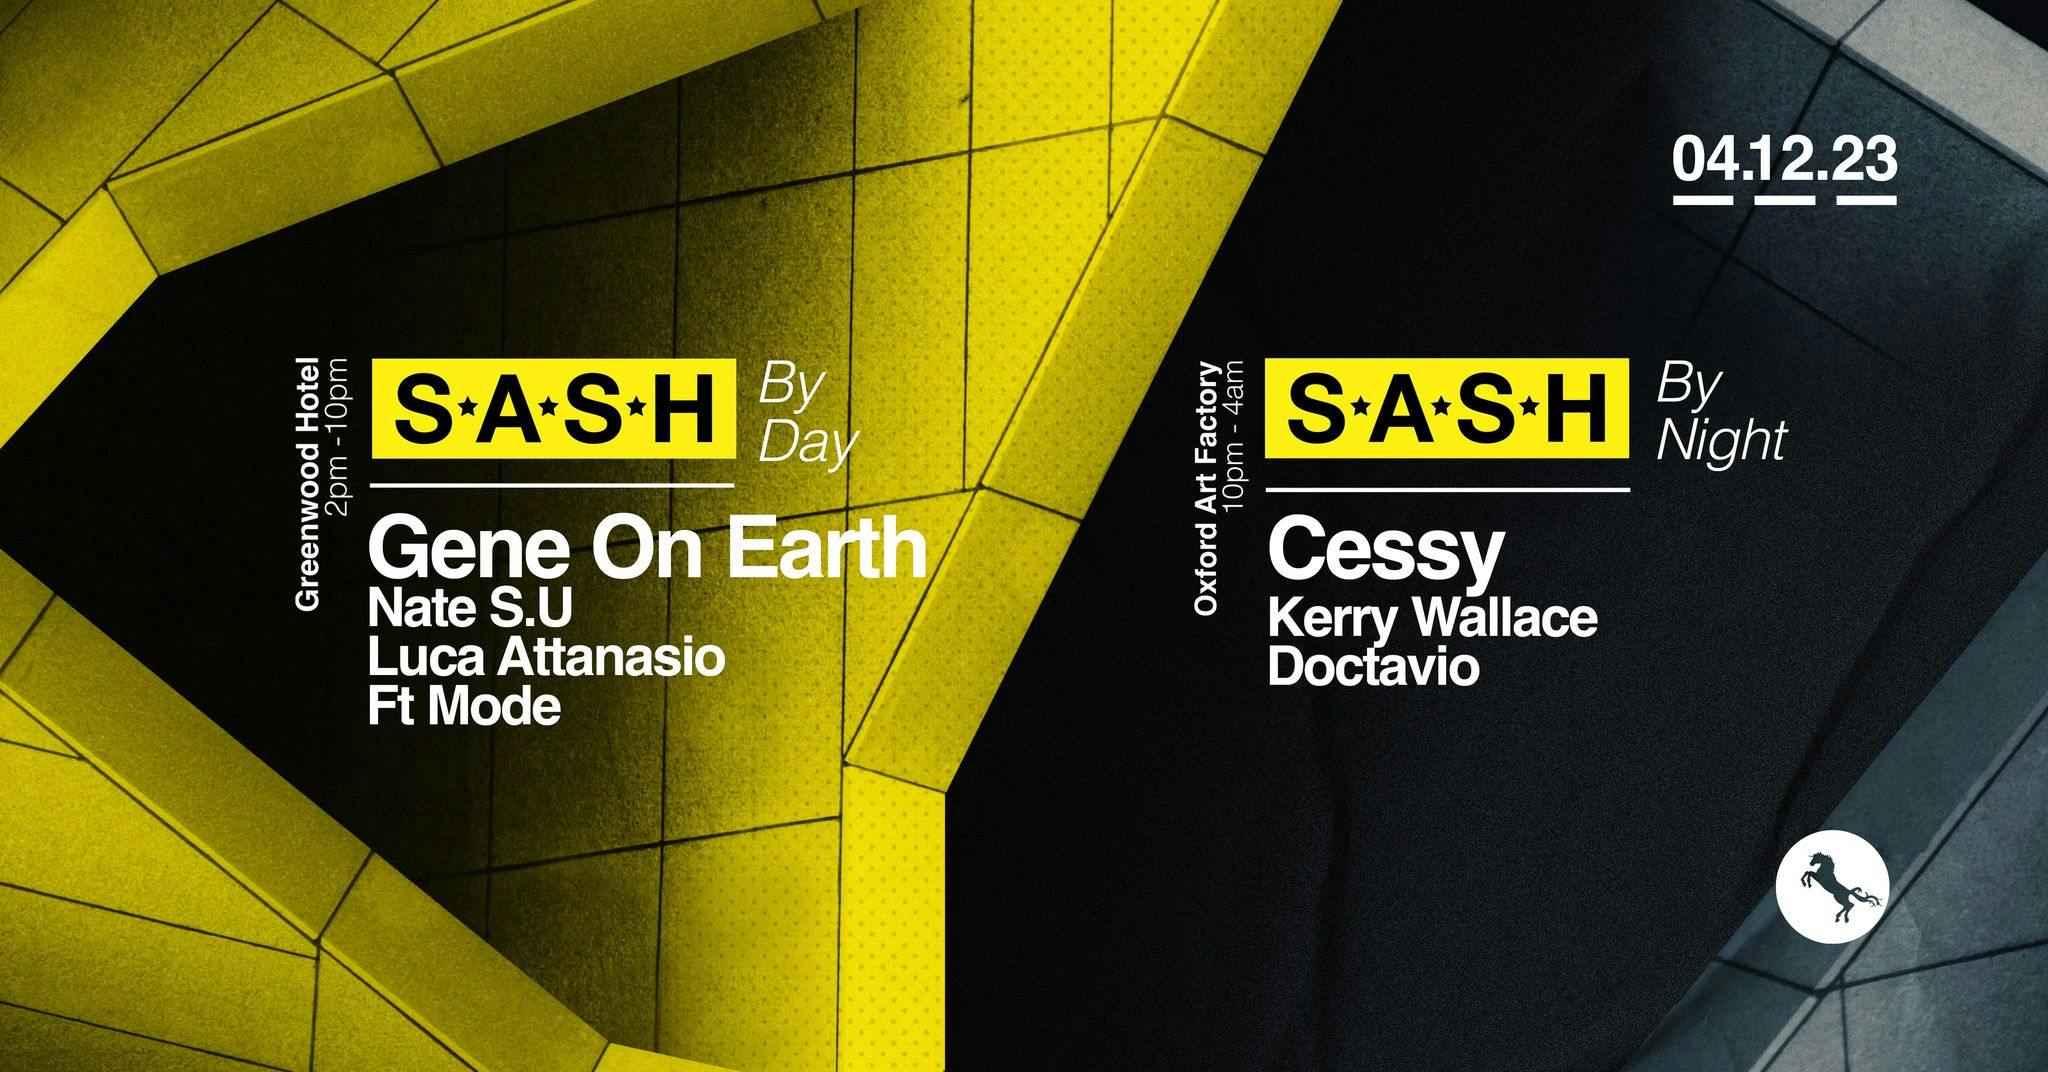 ★ S.A.S.H By Day & Night ★ Gene On Earth ★ Cessy ★